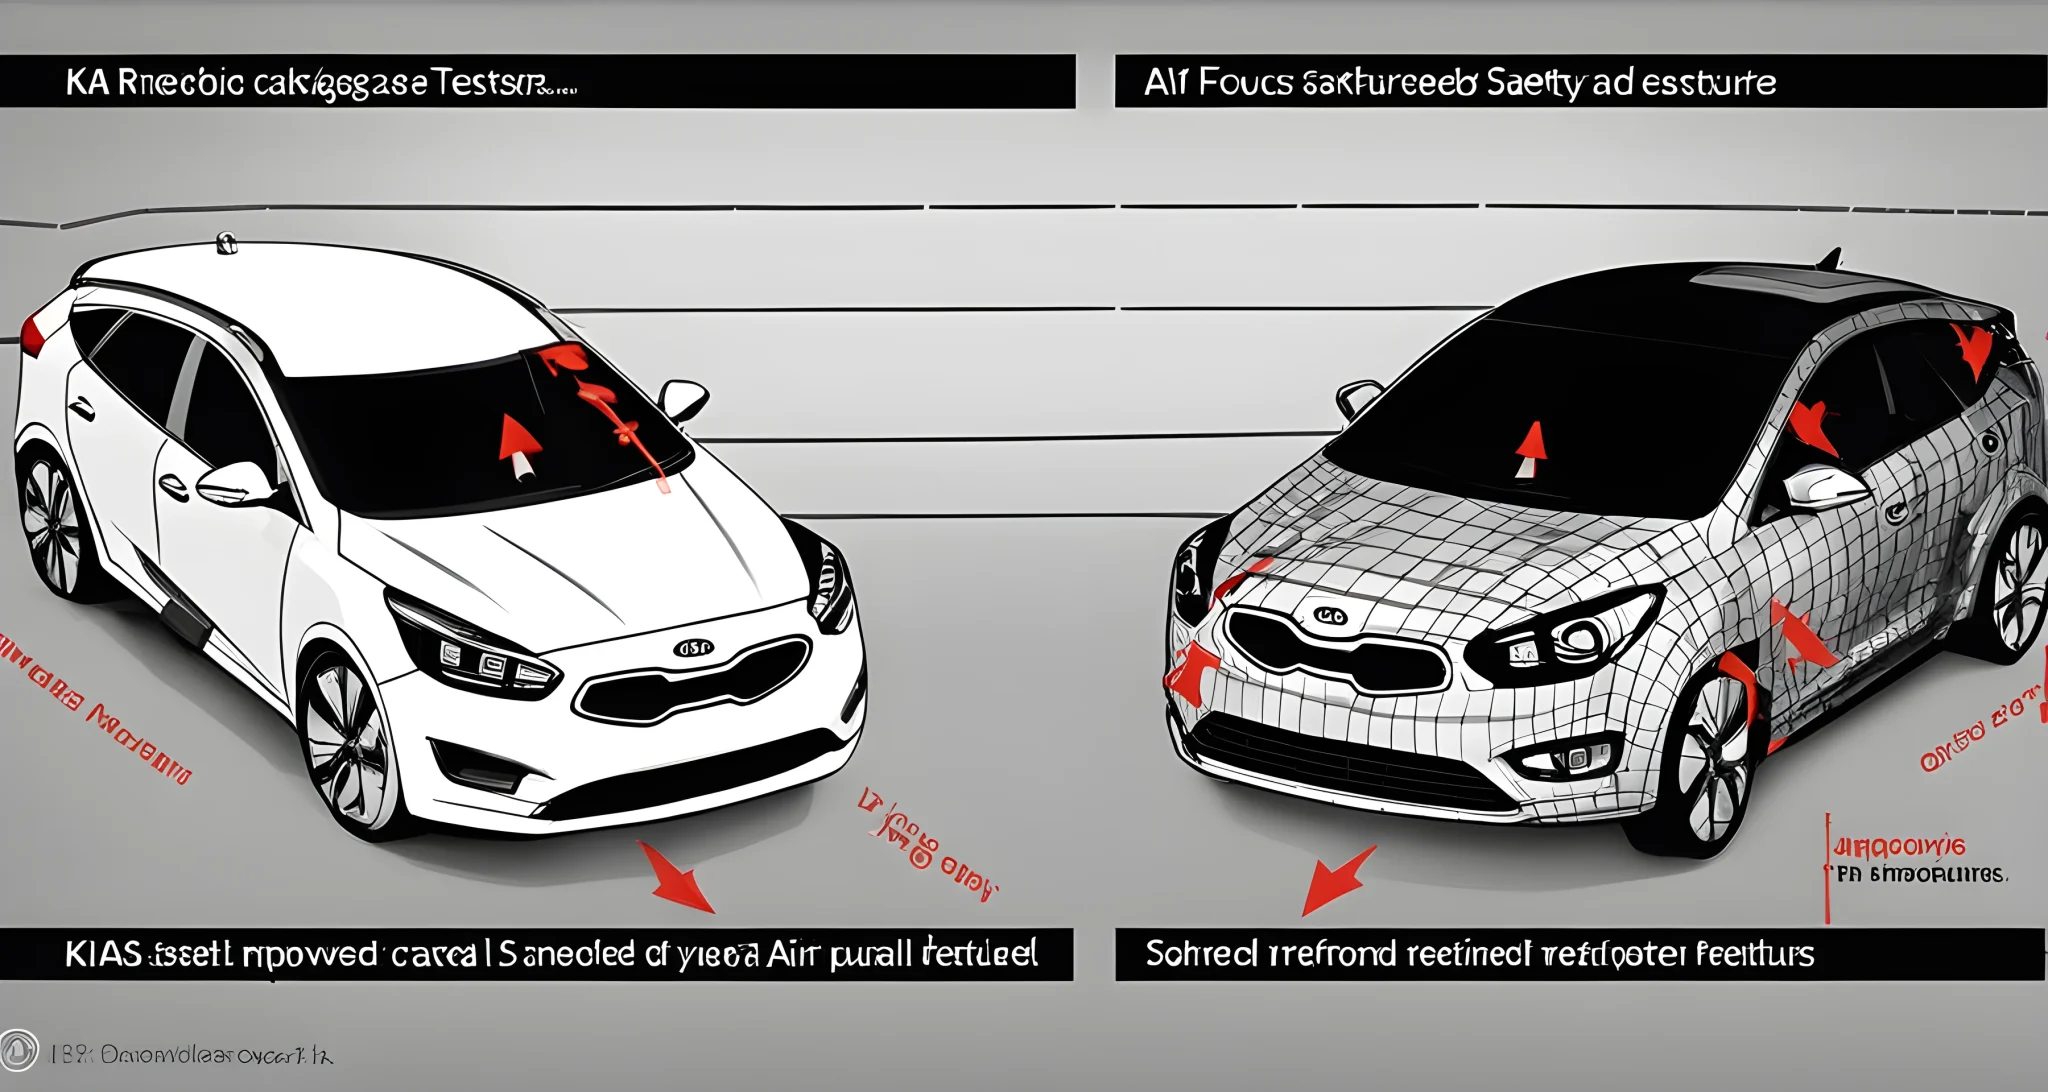 The image shows a side-by-side comparison of the previous and updated safety features in Kia vehicles. The focus is on the improved airbags, reinforced body structure, and updated crash test results.